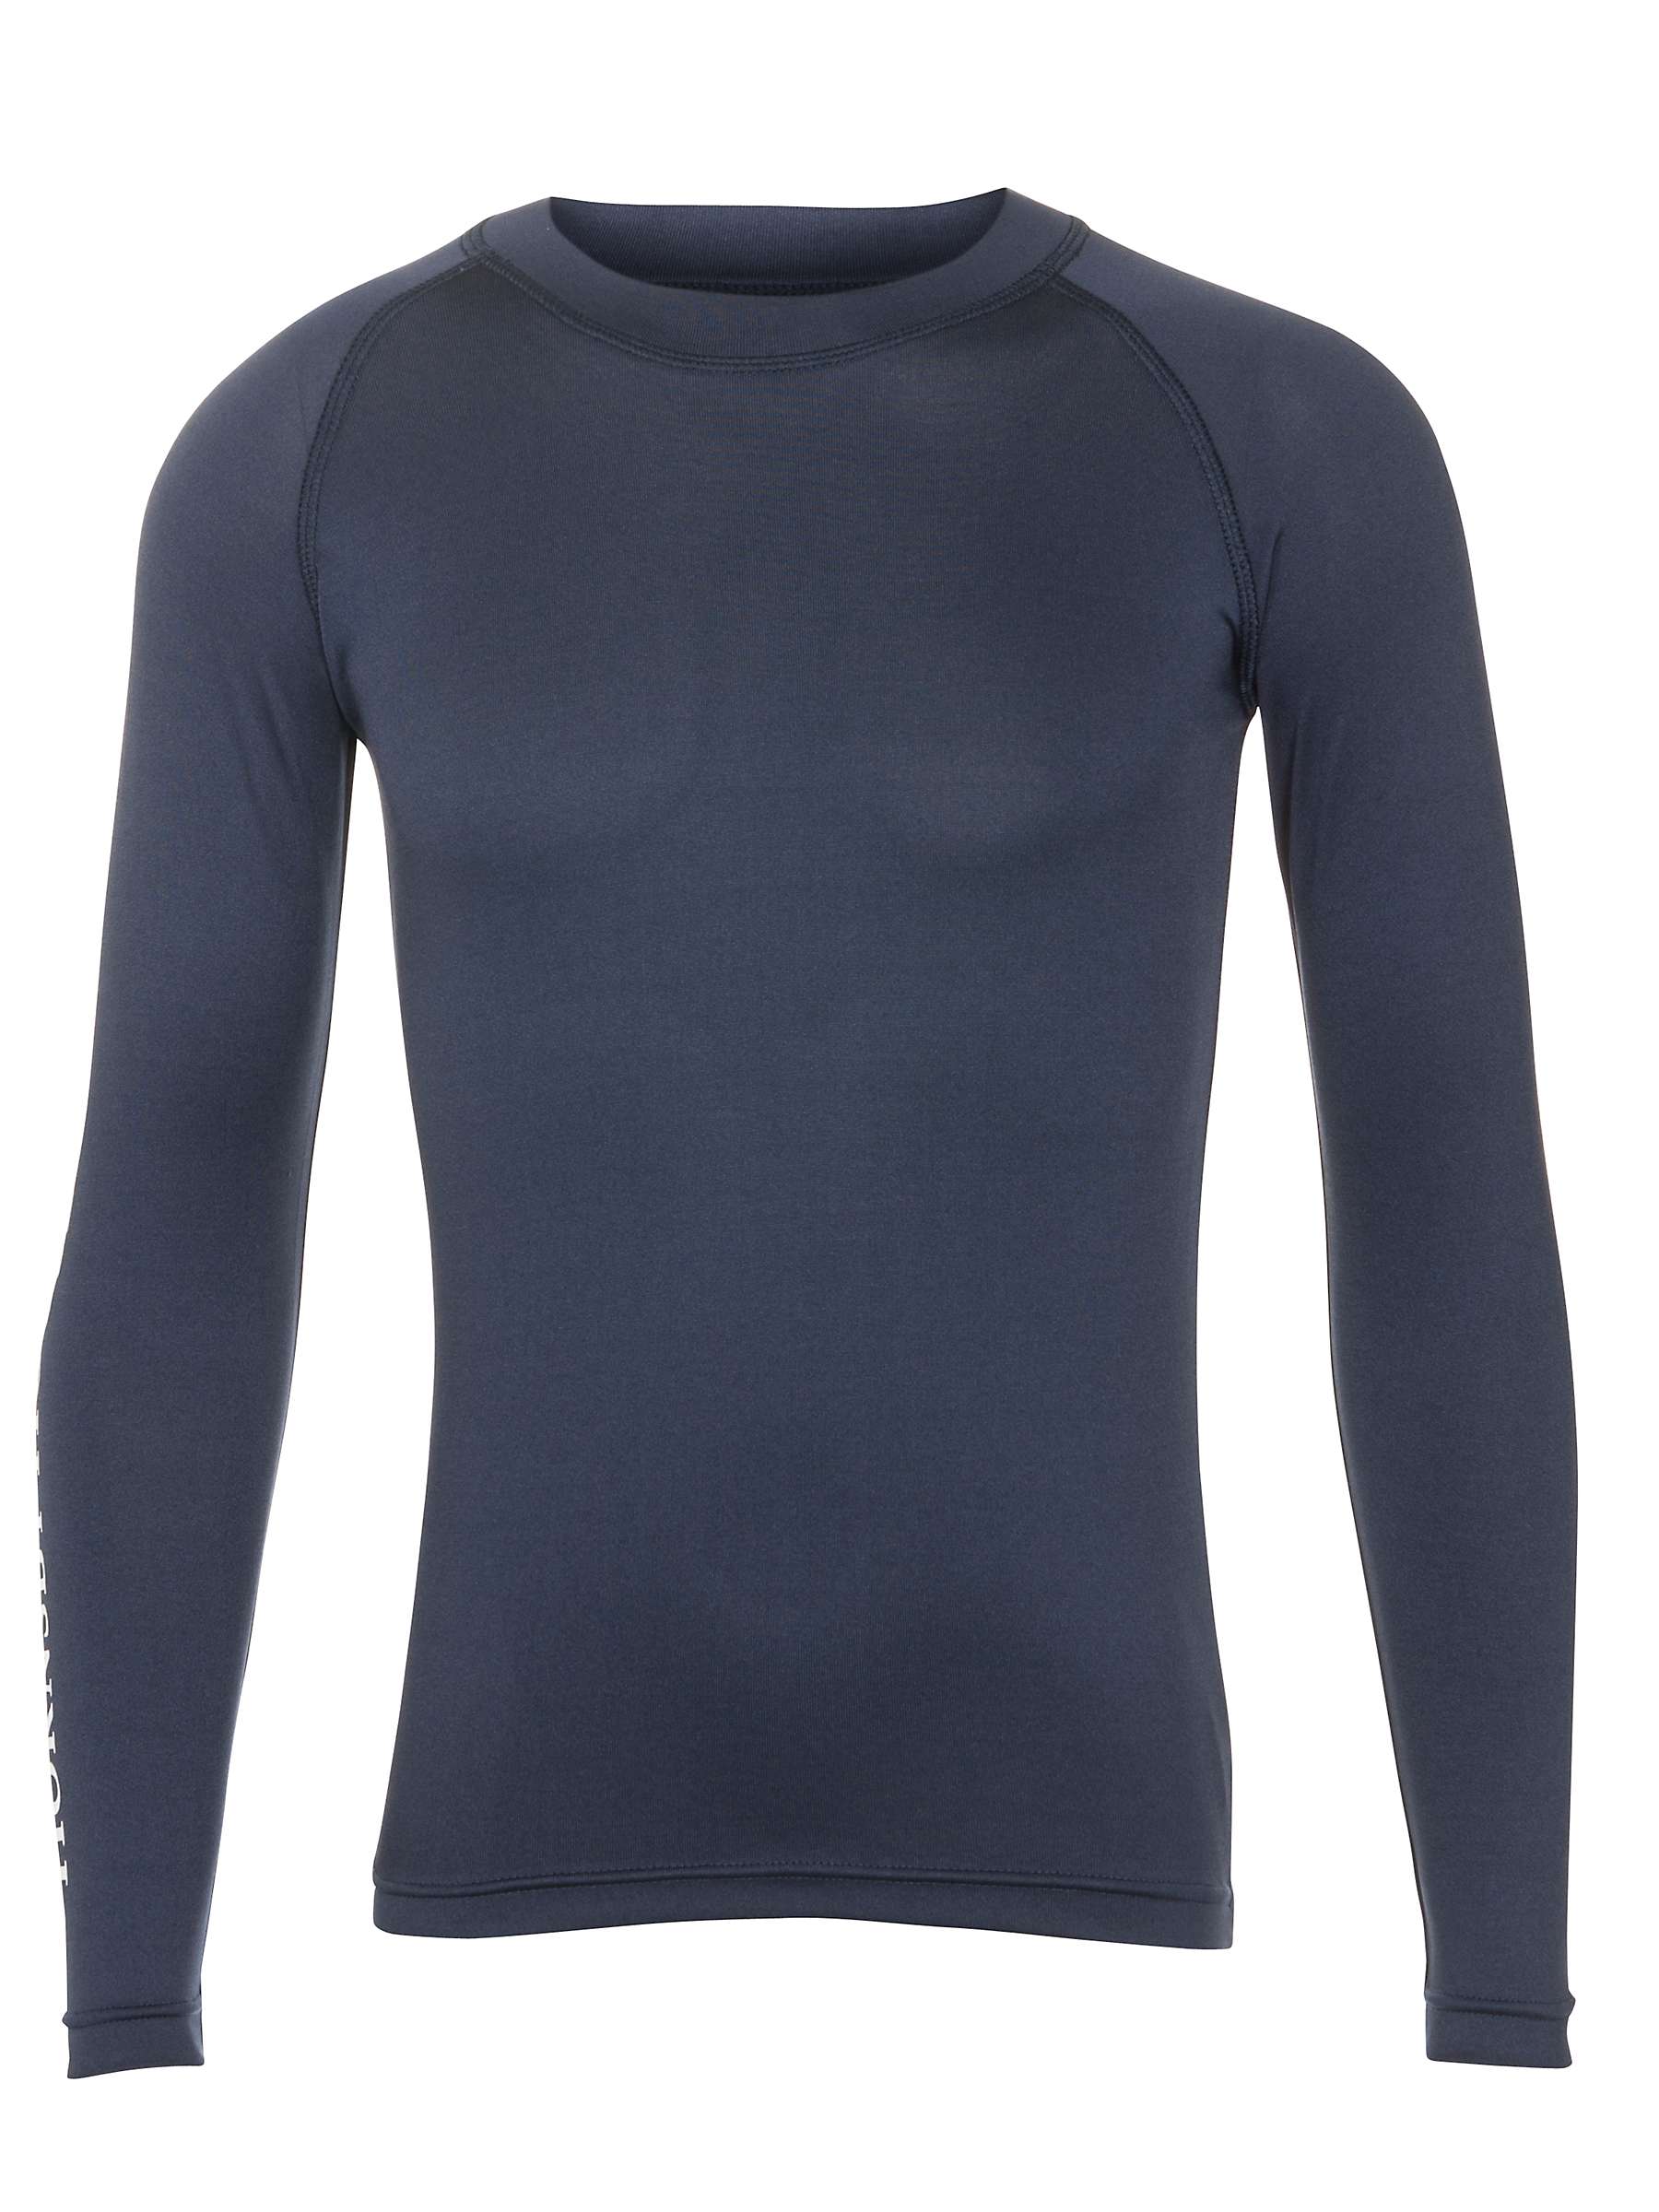 Buy Hornsby House School Unisex Baselayer, Navy Blue Online at johnlewis.com